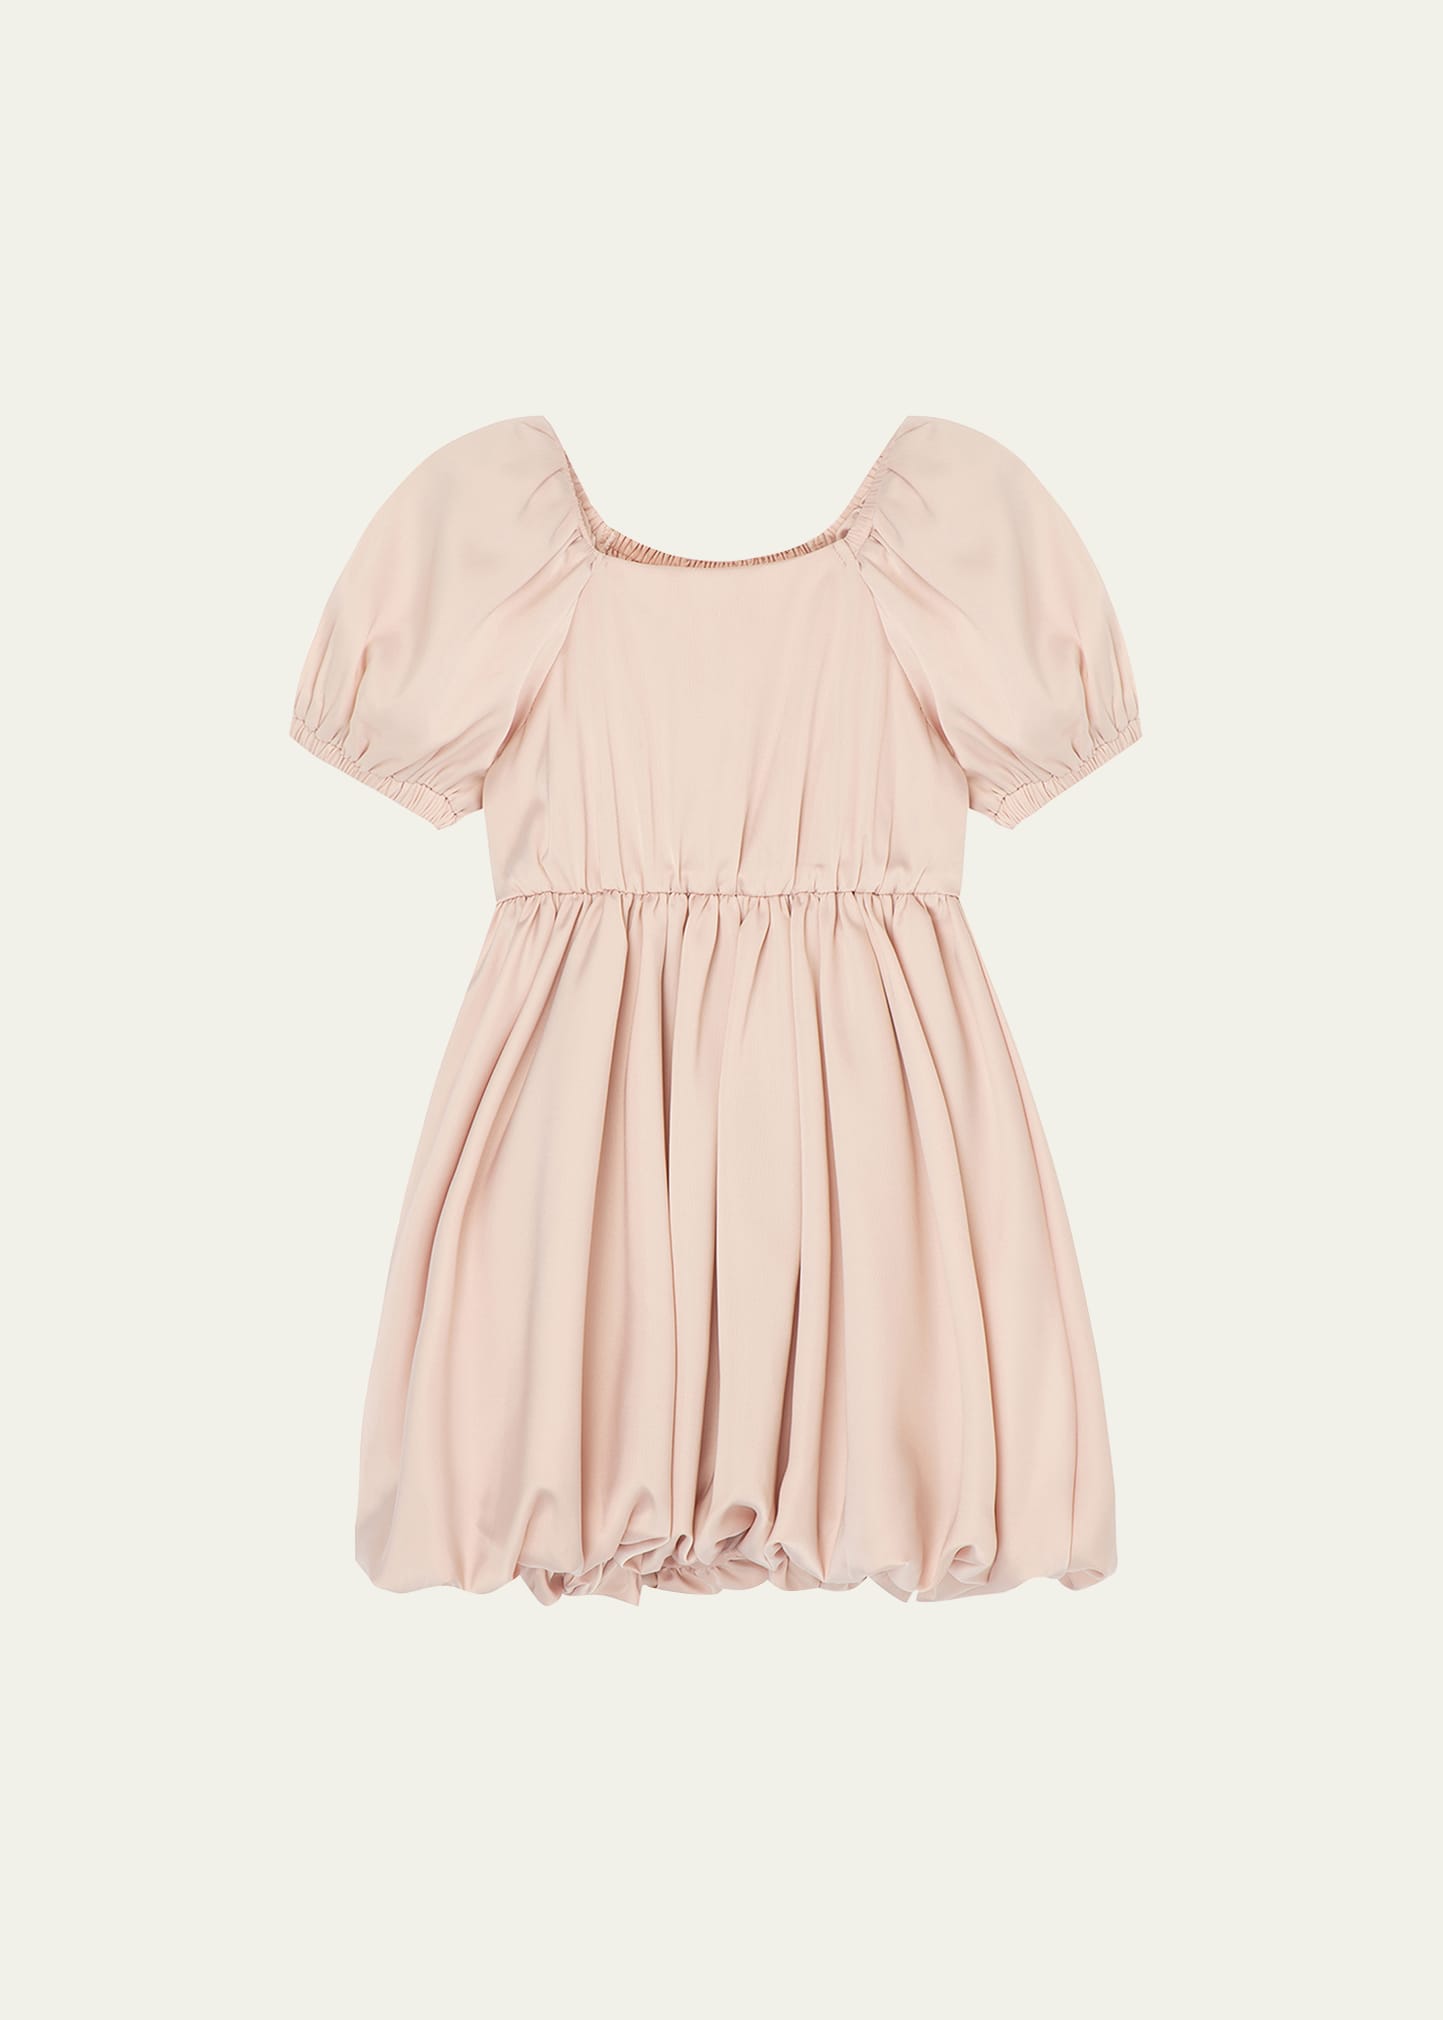 Shop Habitual Girl's Charmeuse Bubble Dress In Light Pink